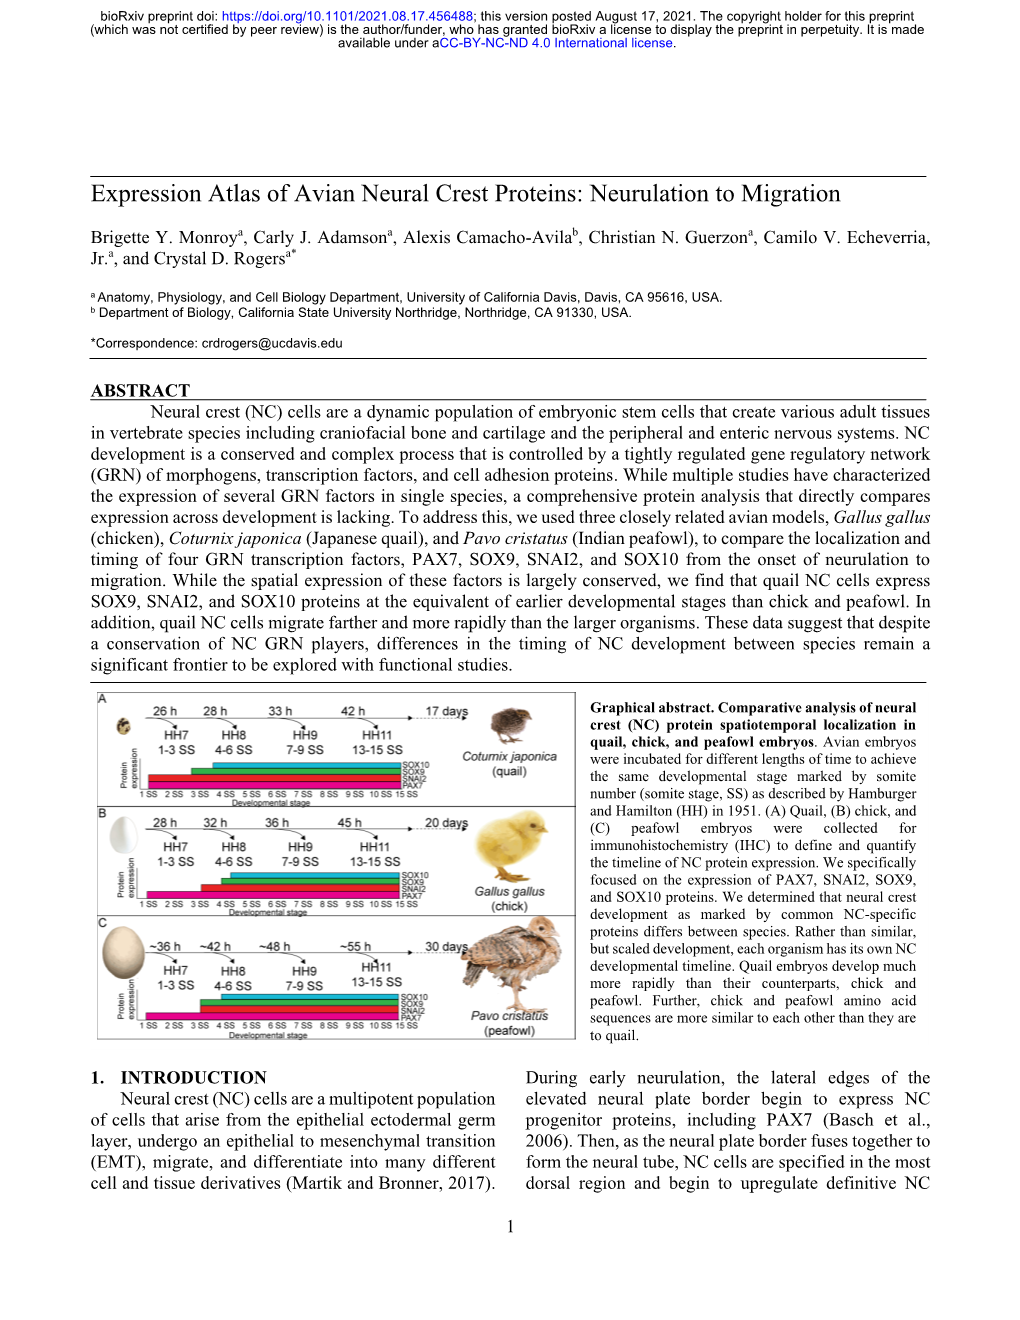 Expression Atlas of Avian Neural Crest Proteins: Neurulation to Migration